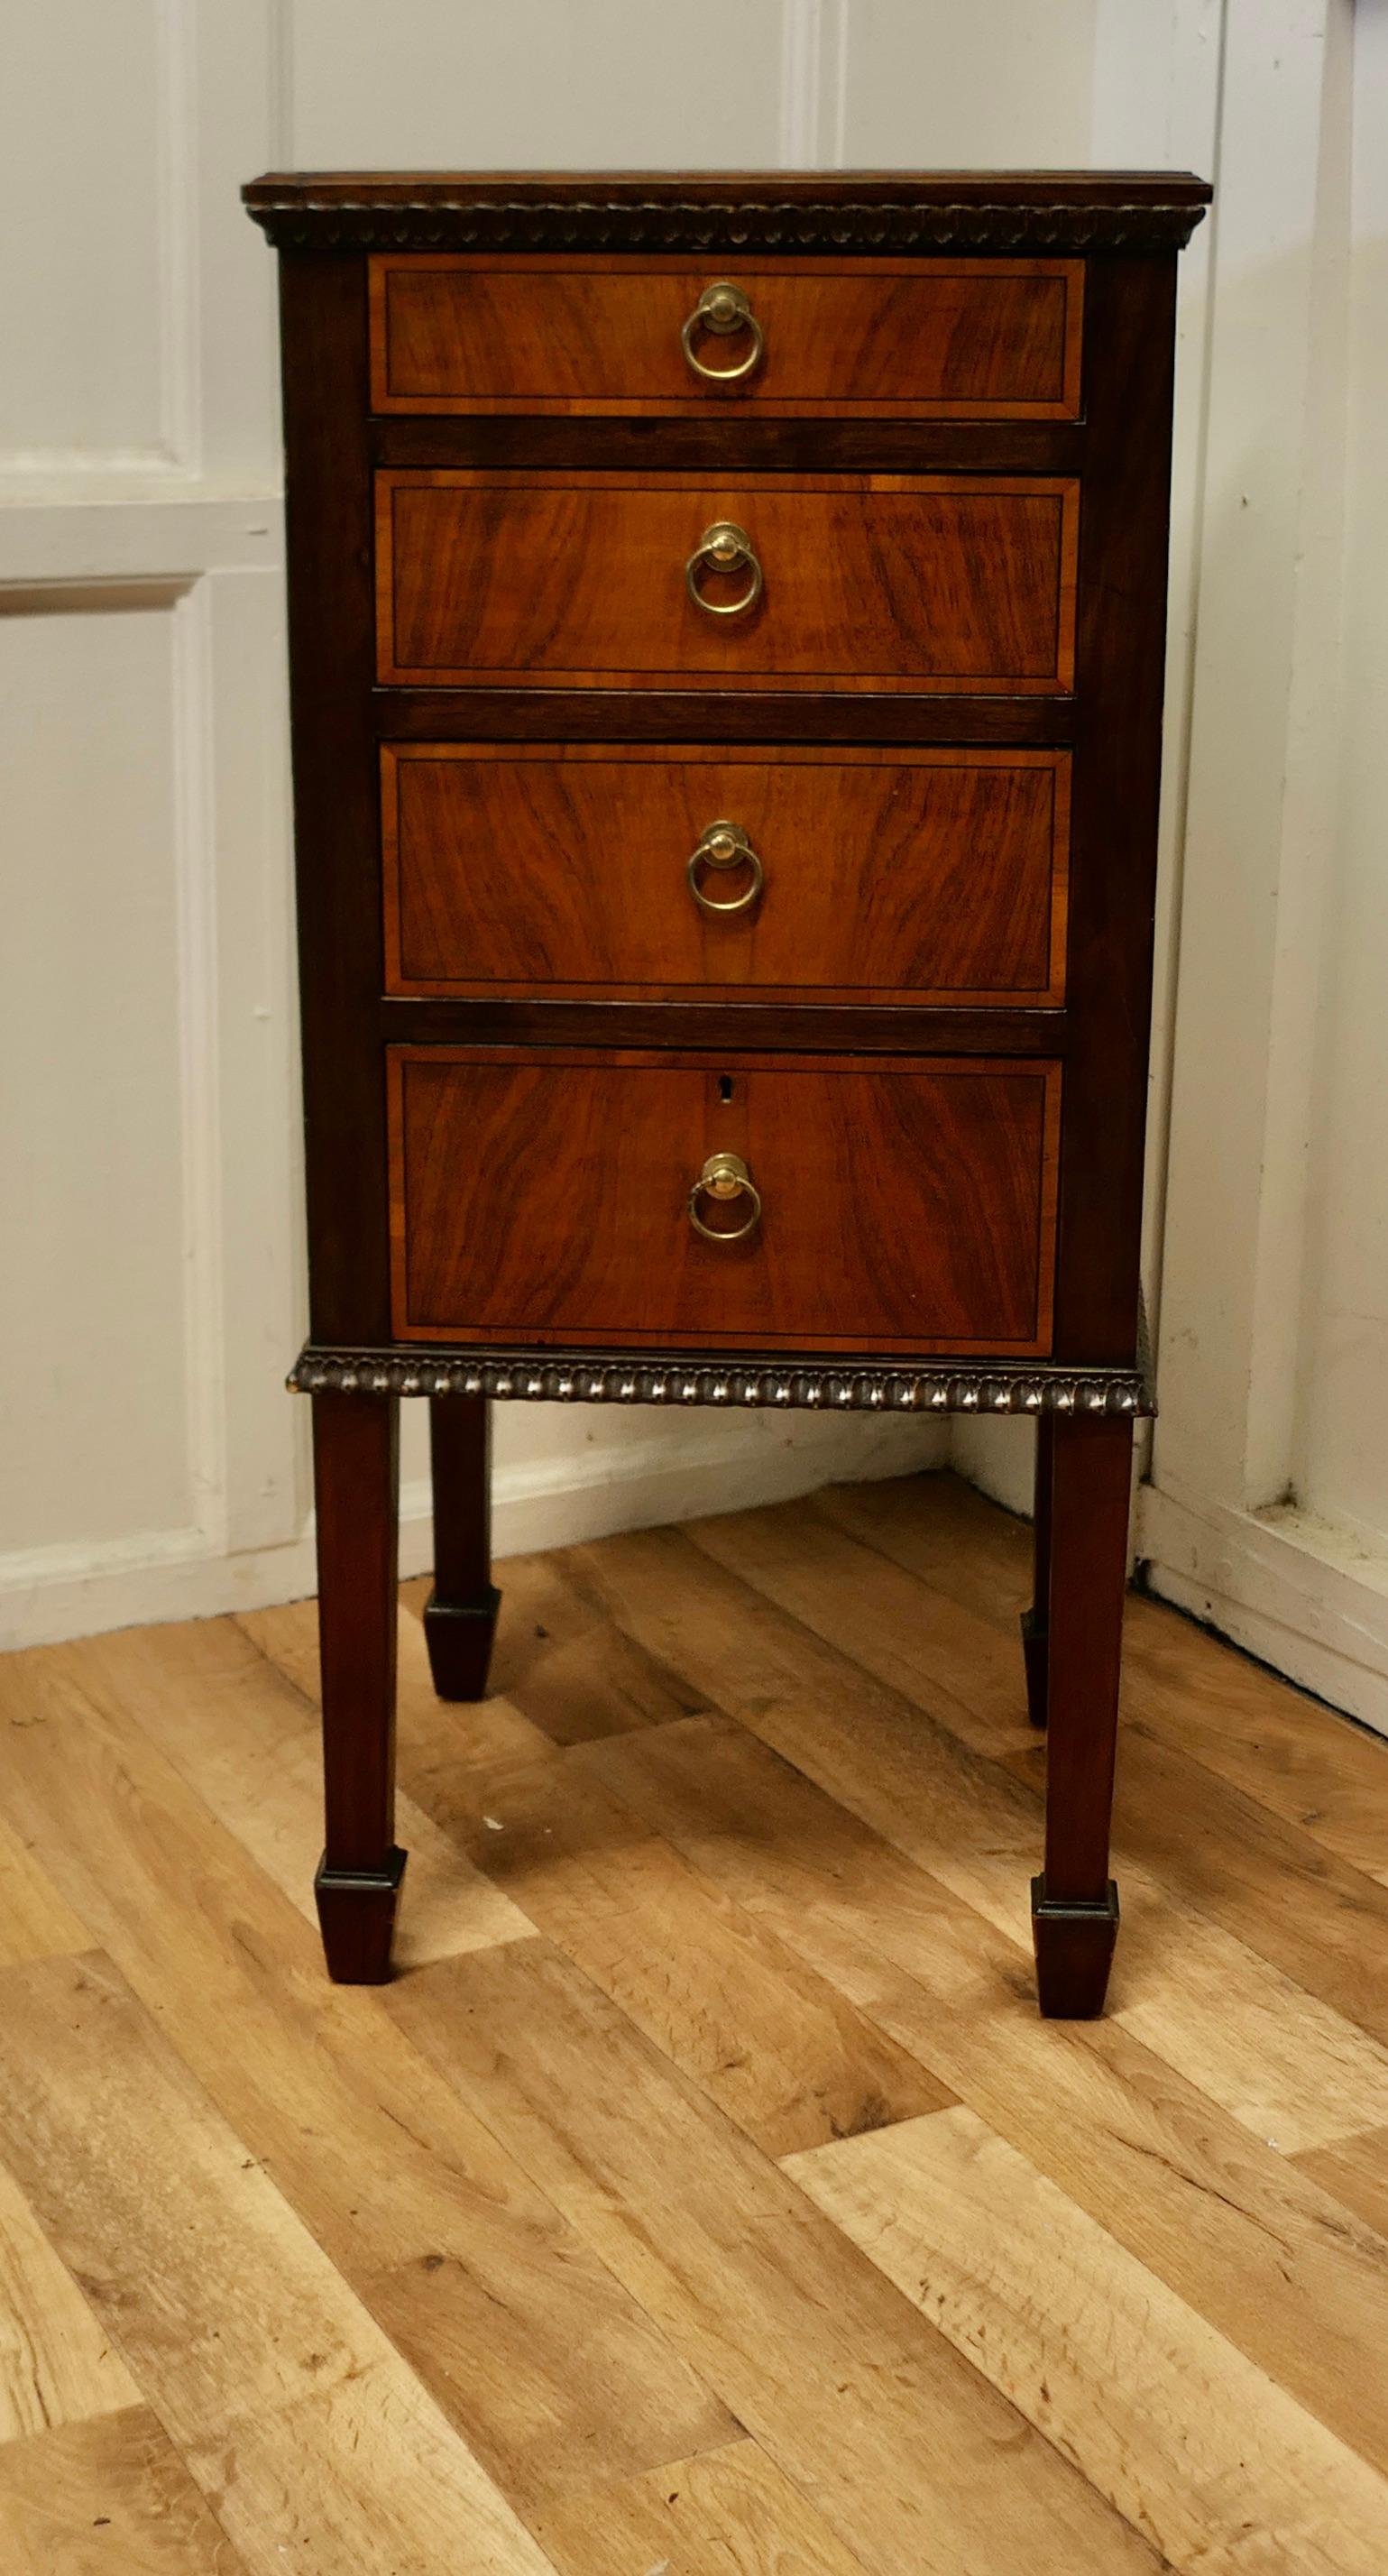 Tall walnut and satinwood chest of drawers 

The chest is set on slim legs it has 4 full width drawers and a little decorative carving
This is a a very attractive looking piece, the chest is made in Walnut with satinwood veneers on the front of